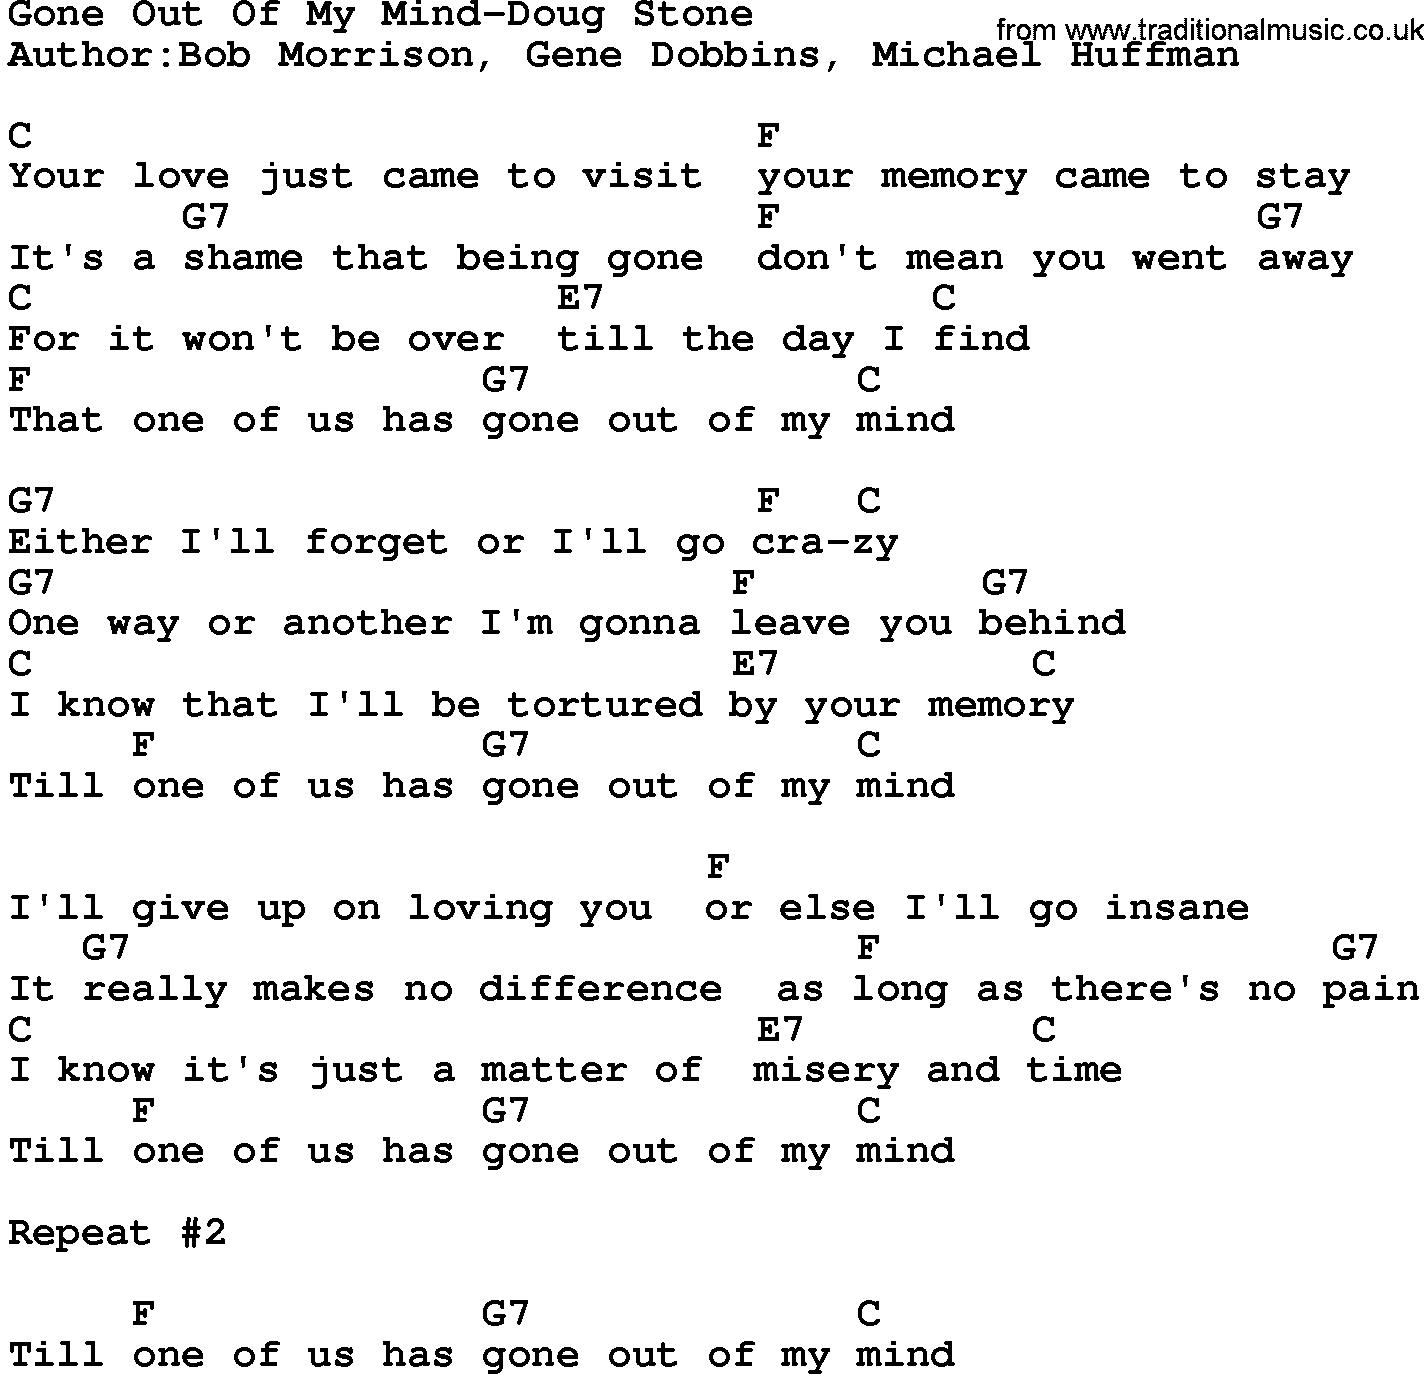 Country music song: Gone Out Of My Mind-Doug Stone lyrics and chords